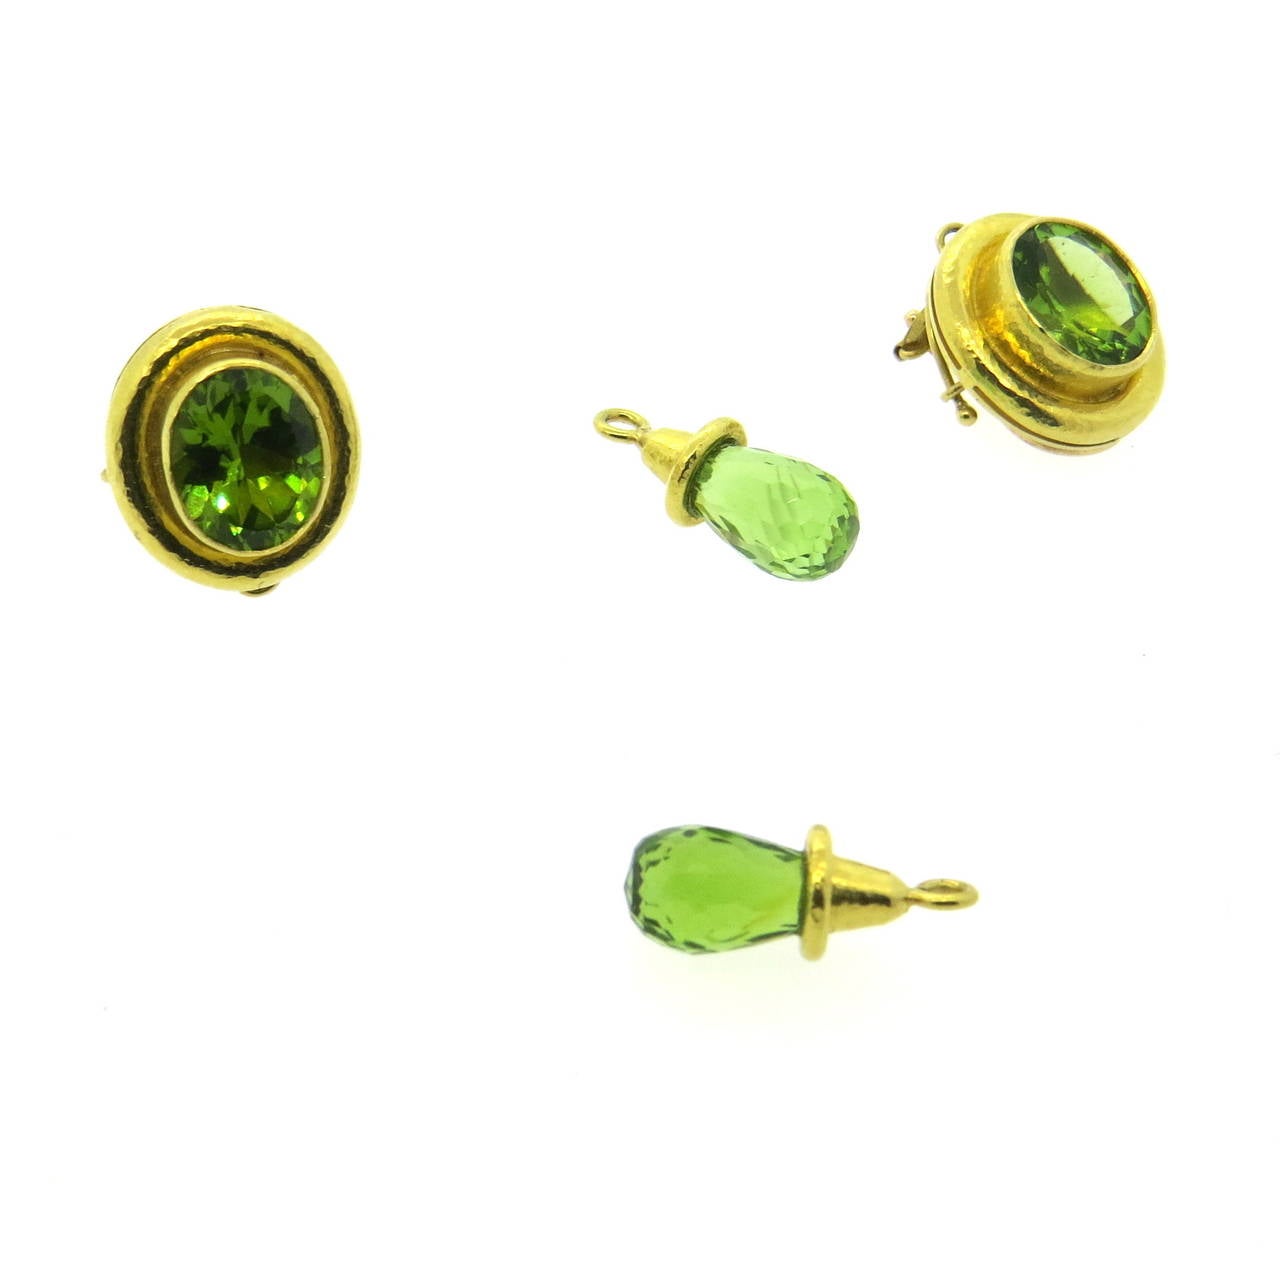 A pair of 18k yellow gold earrings set with faceted peridot and detachable peridot briolettes.  Crafted by Elizabeth Locke, the earrings measure 39mm x 17mm with the drops attached.  The weight of the earrings is 19.3 grams.